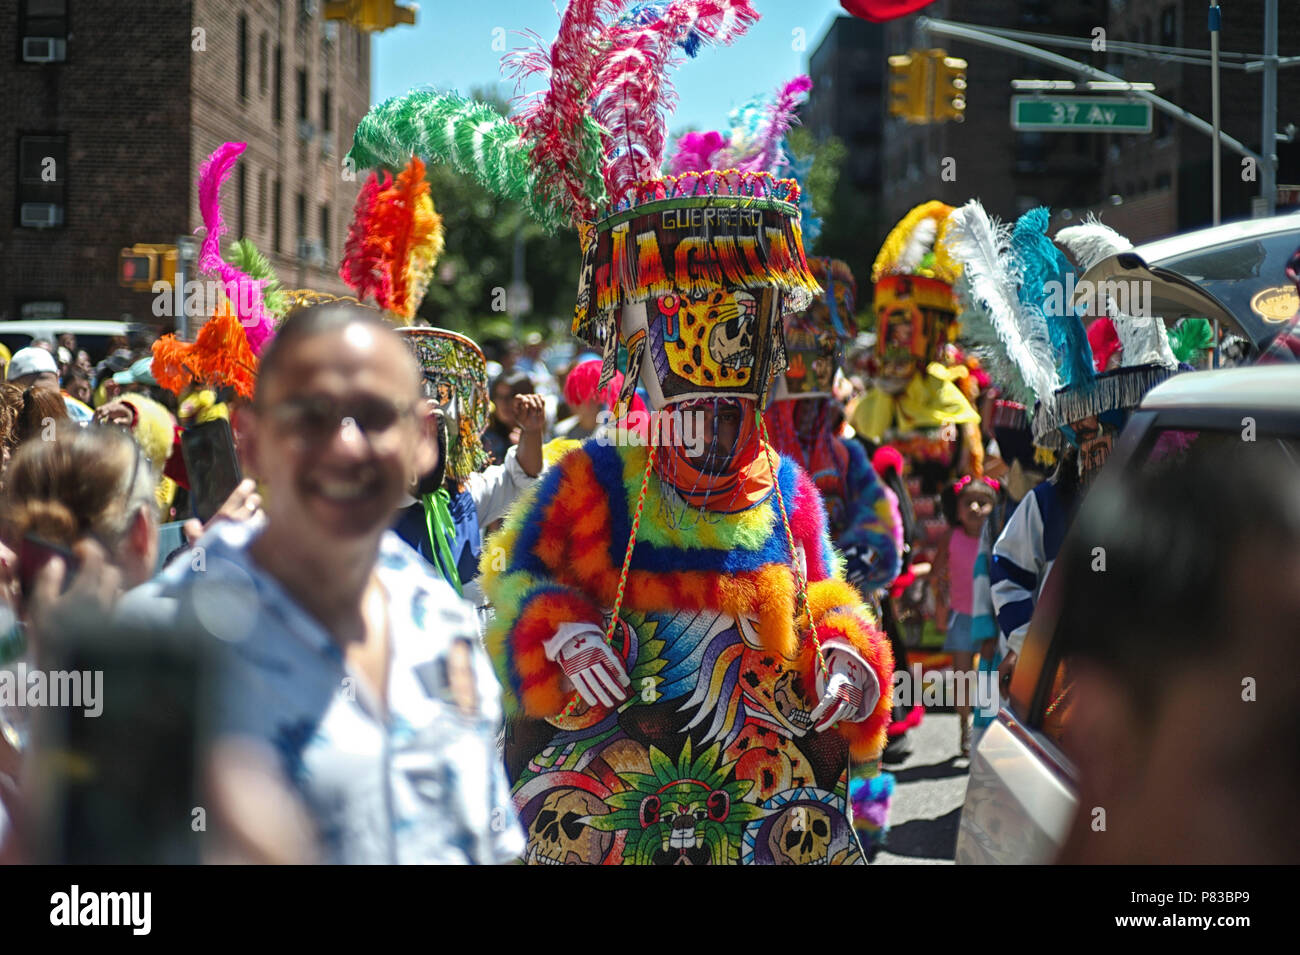 New York City, Queens, USA. 8th July, 2018. Chinelos are a kind of  traditional costumed dancer which is popular in the Mexican state of  Morelos, parts of the State of Mexico and